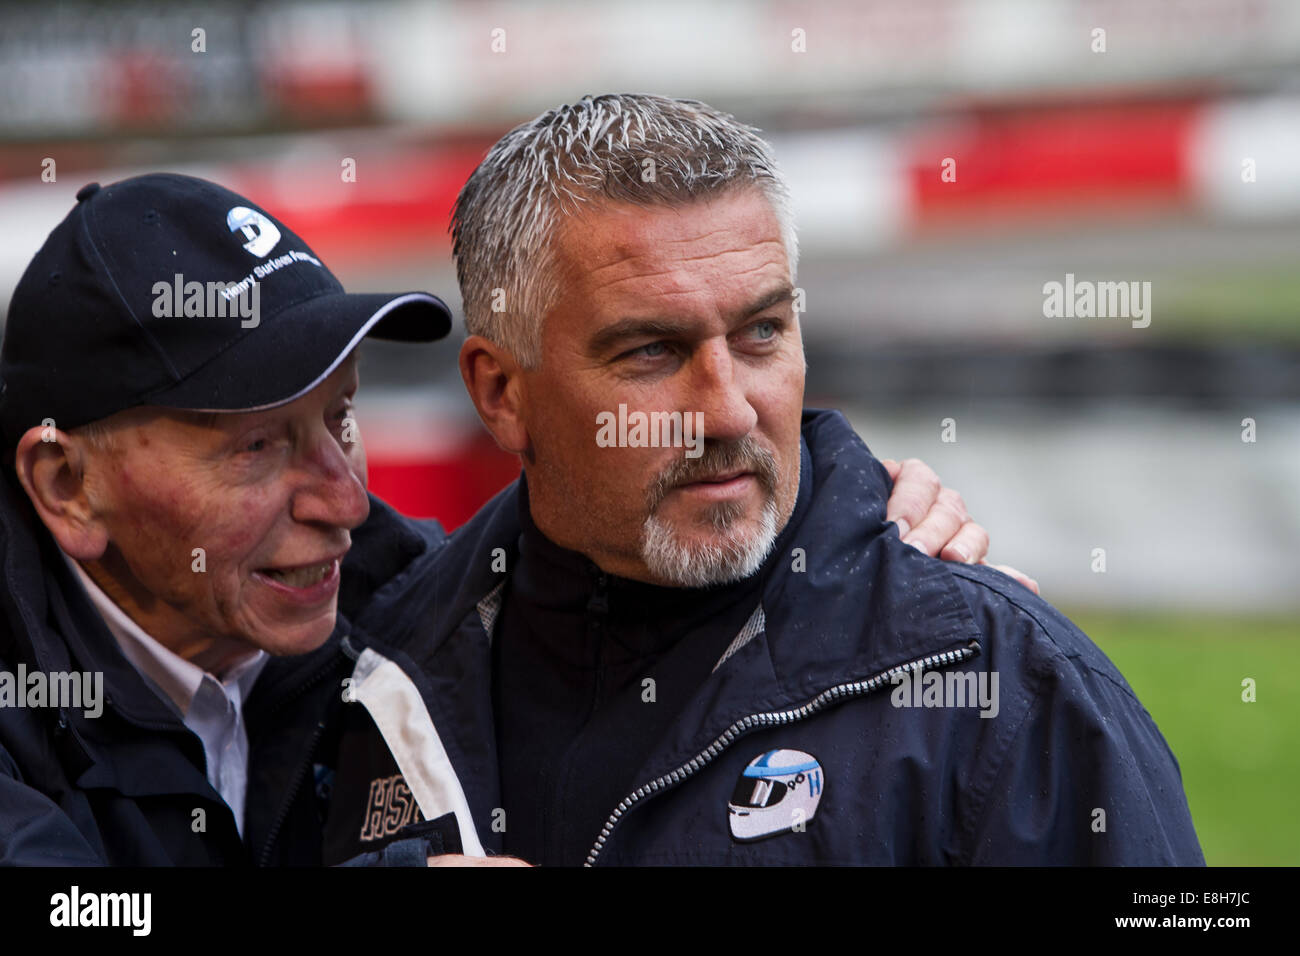 Kent, UK. 8th October, 2014. BBC Television's 'Great British Bake Off' star Paul Hollywood with John Surtees opens this year's Henry Surtees Challenge at Buckmore Park, Kent, United Kingdom. Credit:  theodore liasi/Alamy Live News Stock Photo